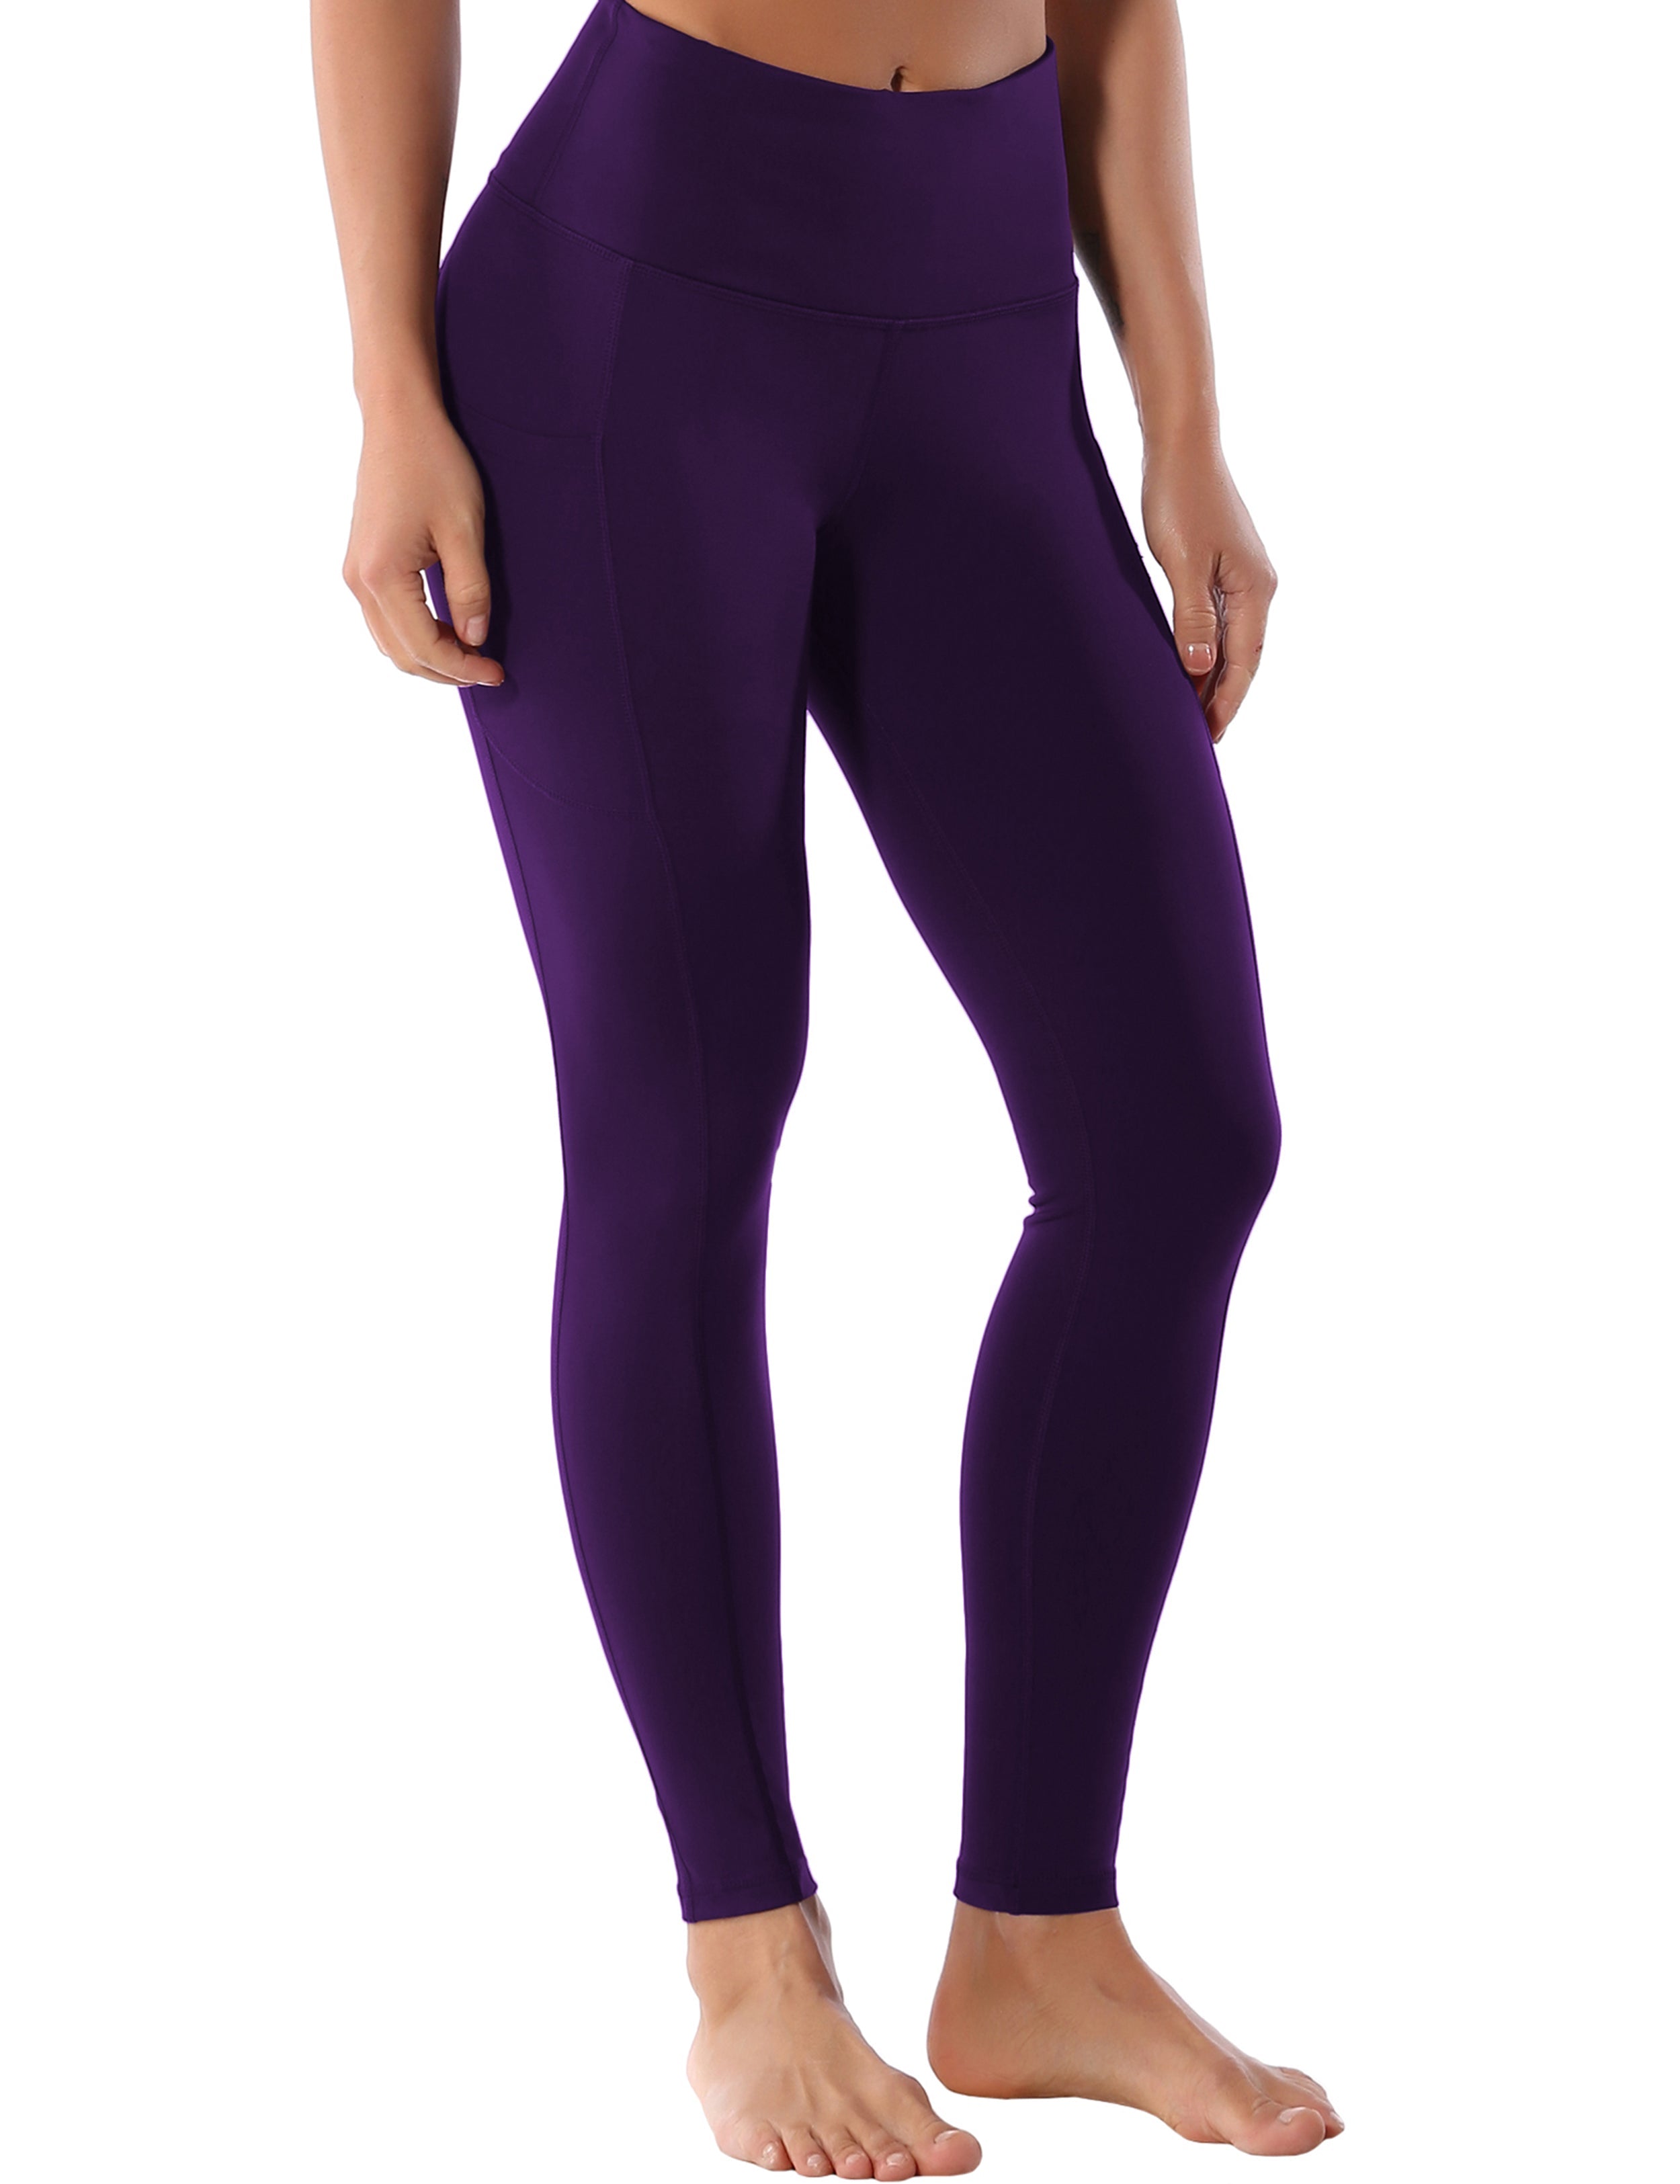 Hip Line Side Pockets Gym Pants eggplantpurple Sexy Hip Line Side Pockets 75%Nylon/25%Spandex Fabric doesn't attract lint easily 4-way stretch No see-through Moisture-wicking Tummy control Inner pocket Two lengths